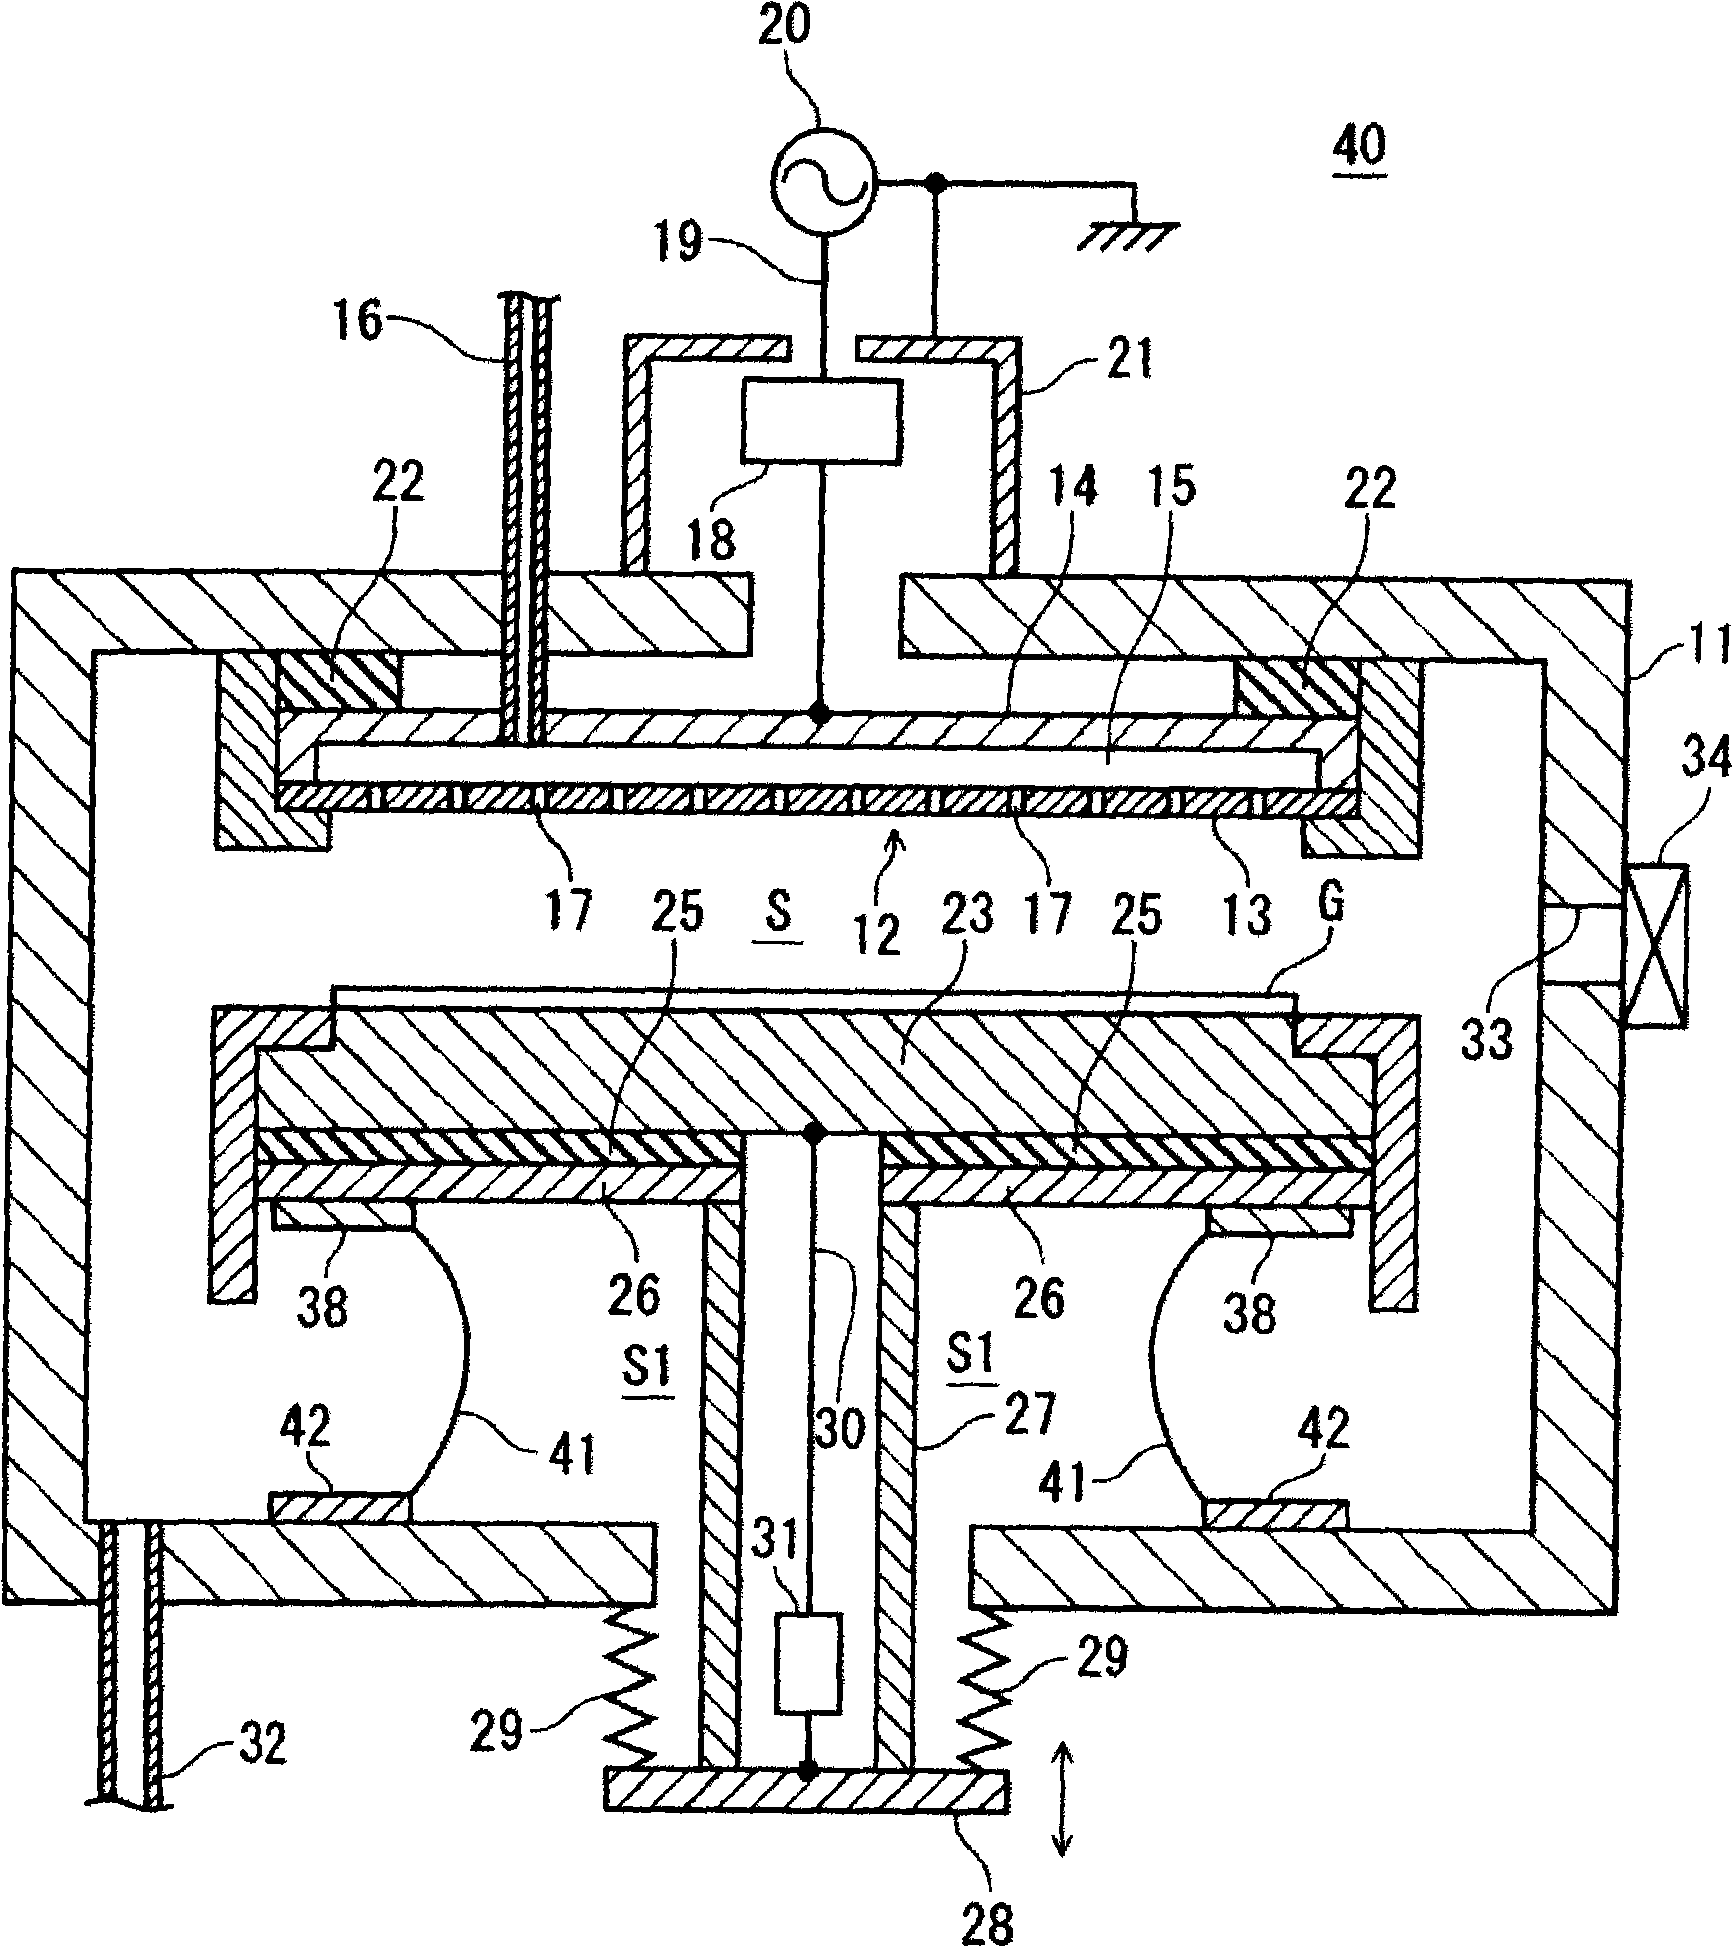 Plasma treatment apparatus and short circuit of high frequency current